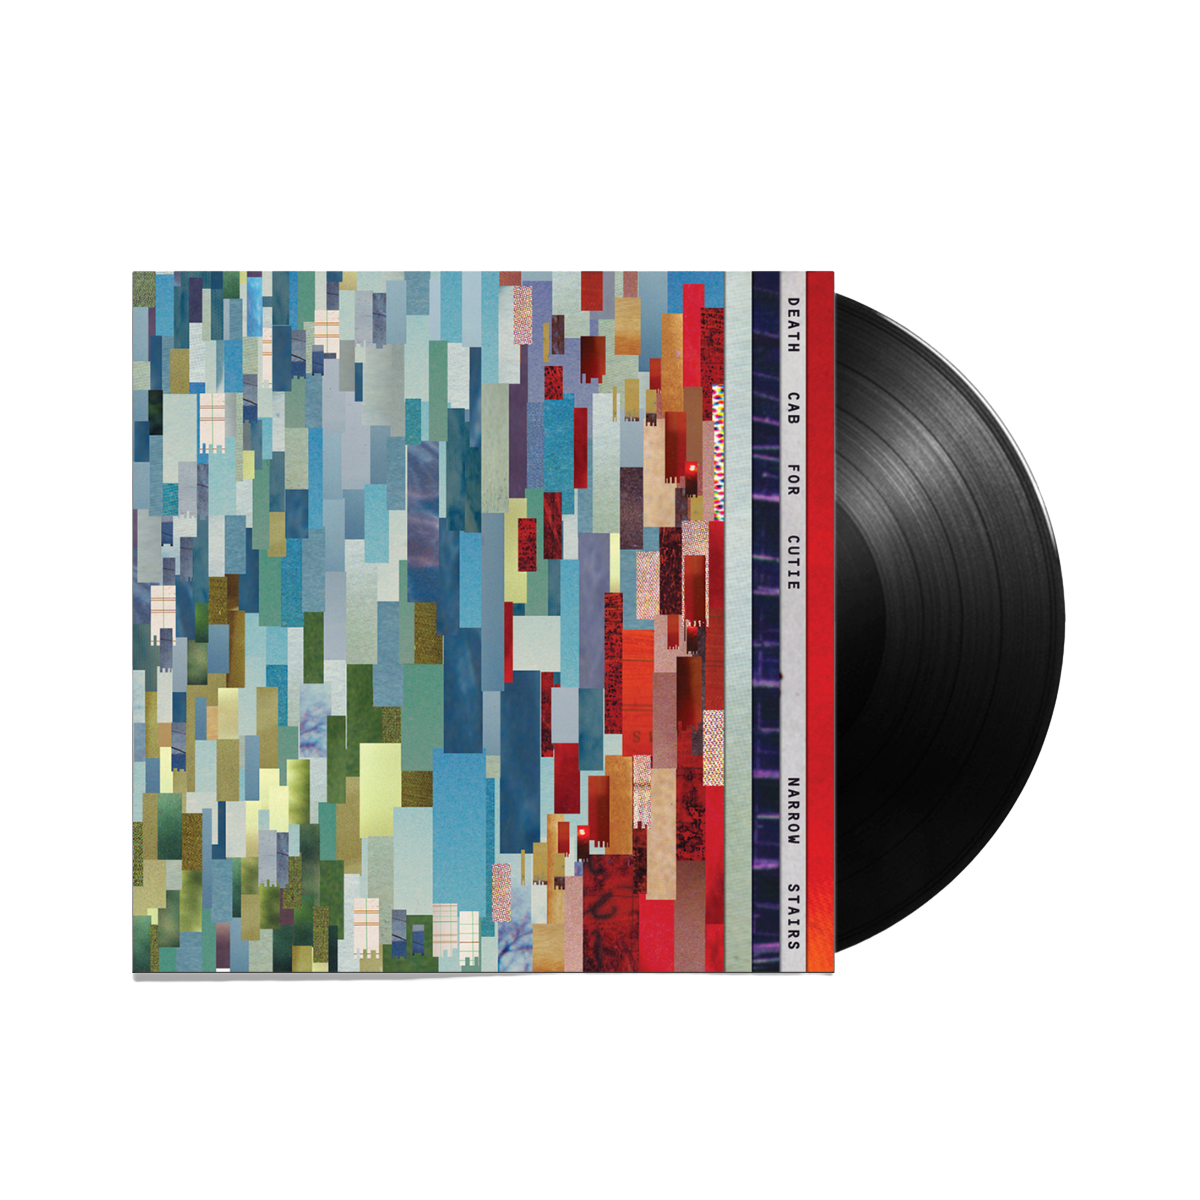 Death Cab For Cutie - Narrow Stairs (Audiophile Music On Vinyl Import) [LP]